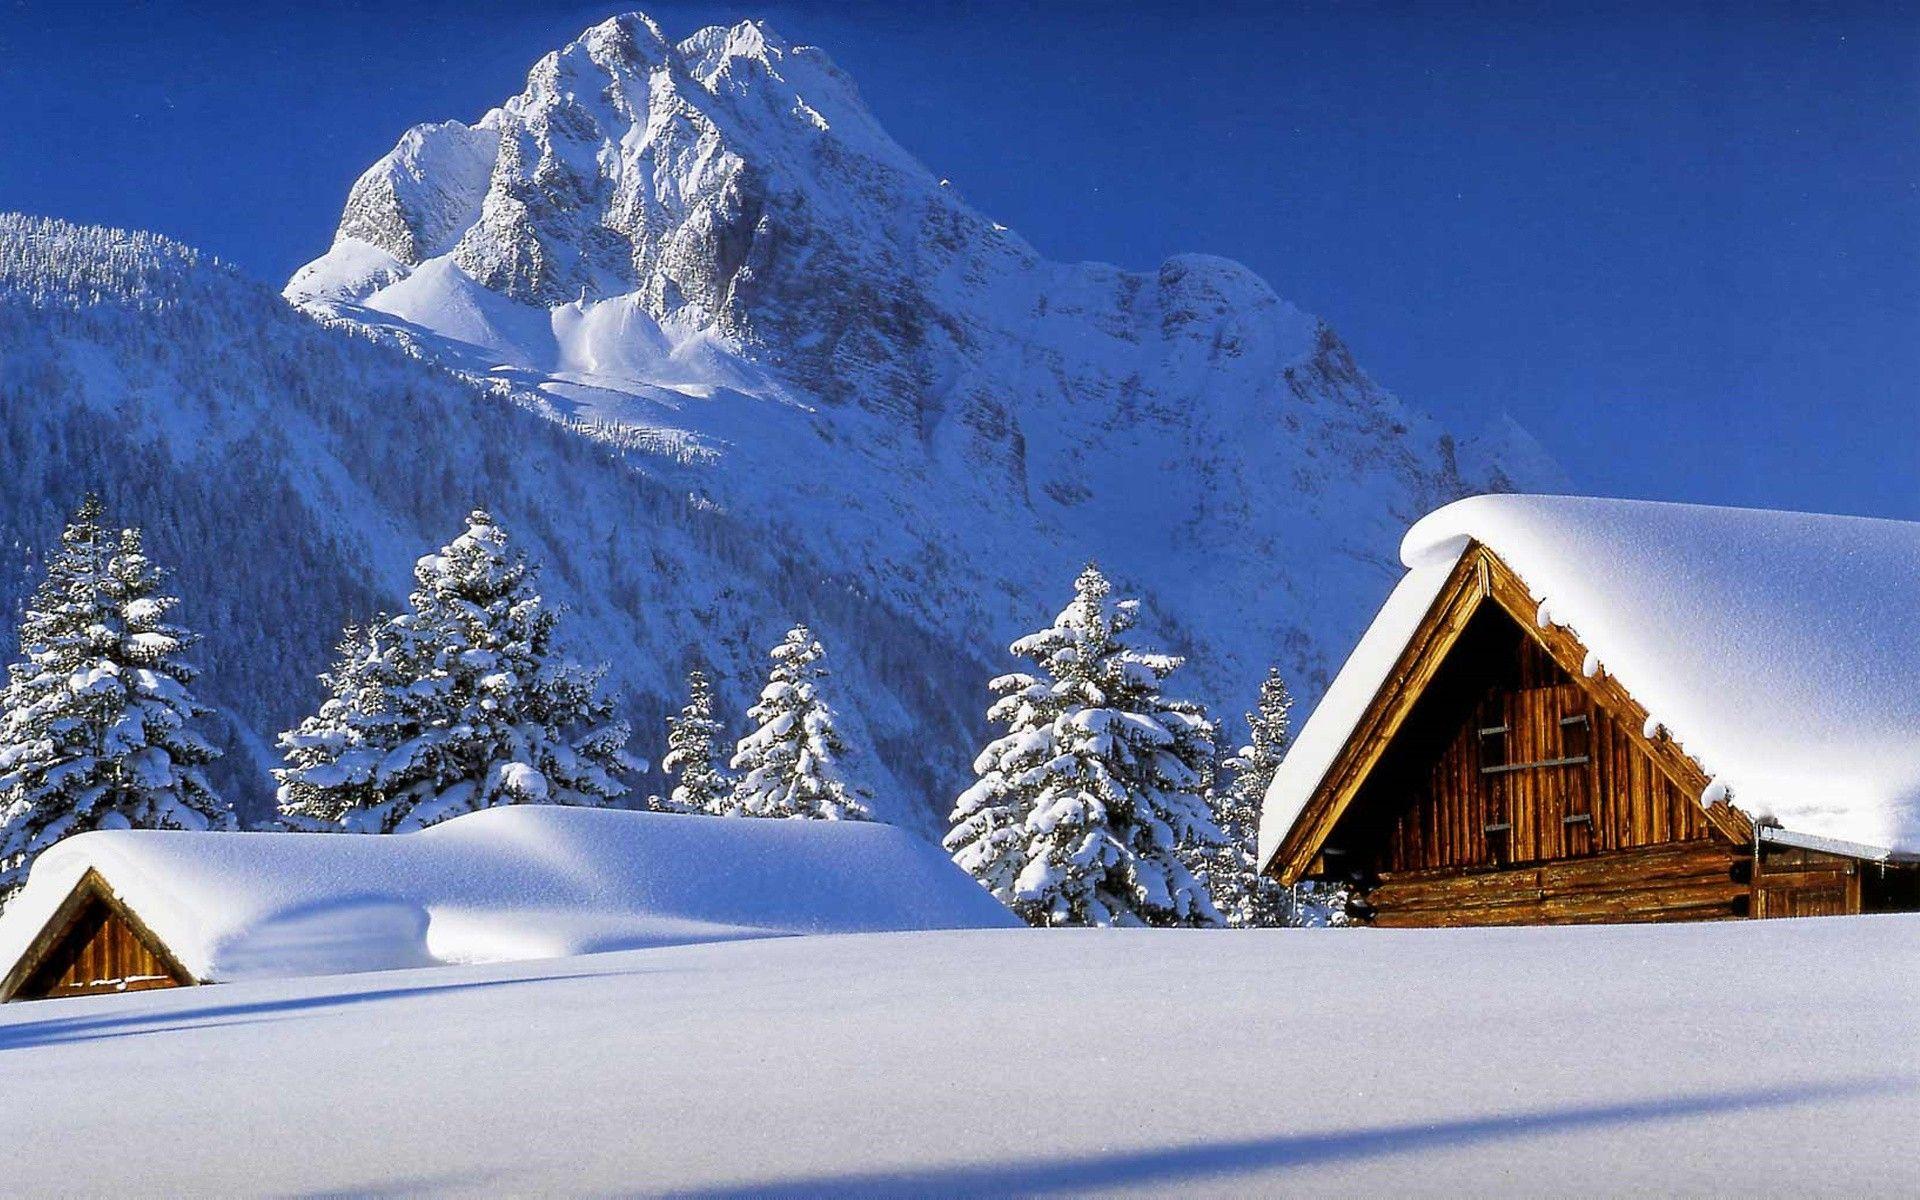 Winter: Mountains Snow Snowy Winter House Nature Wallpaper Apple